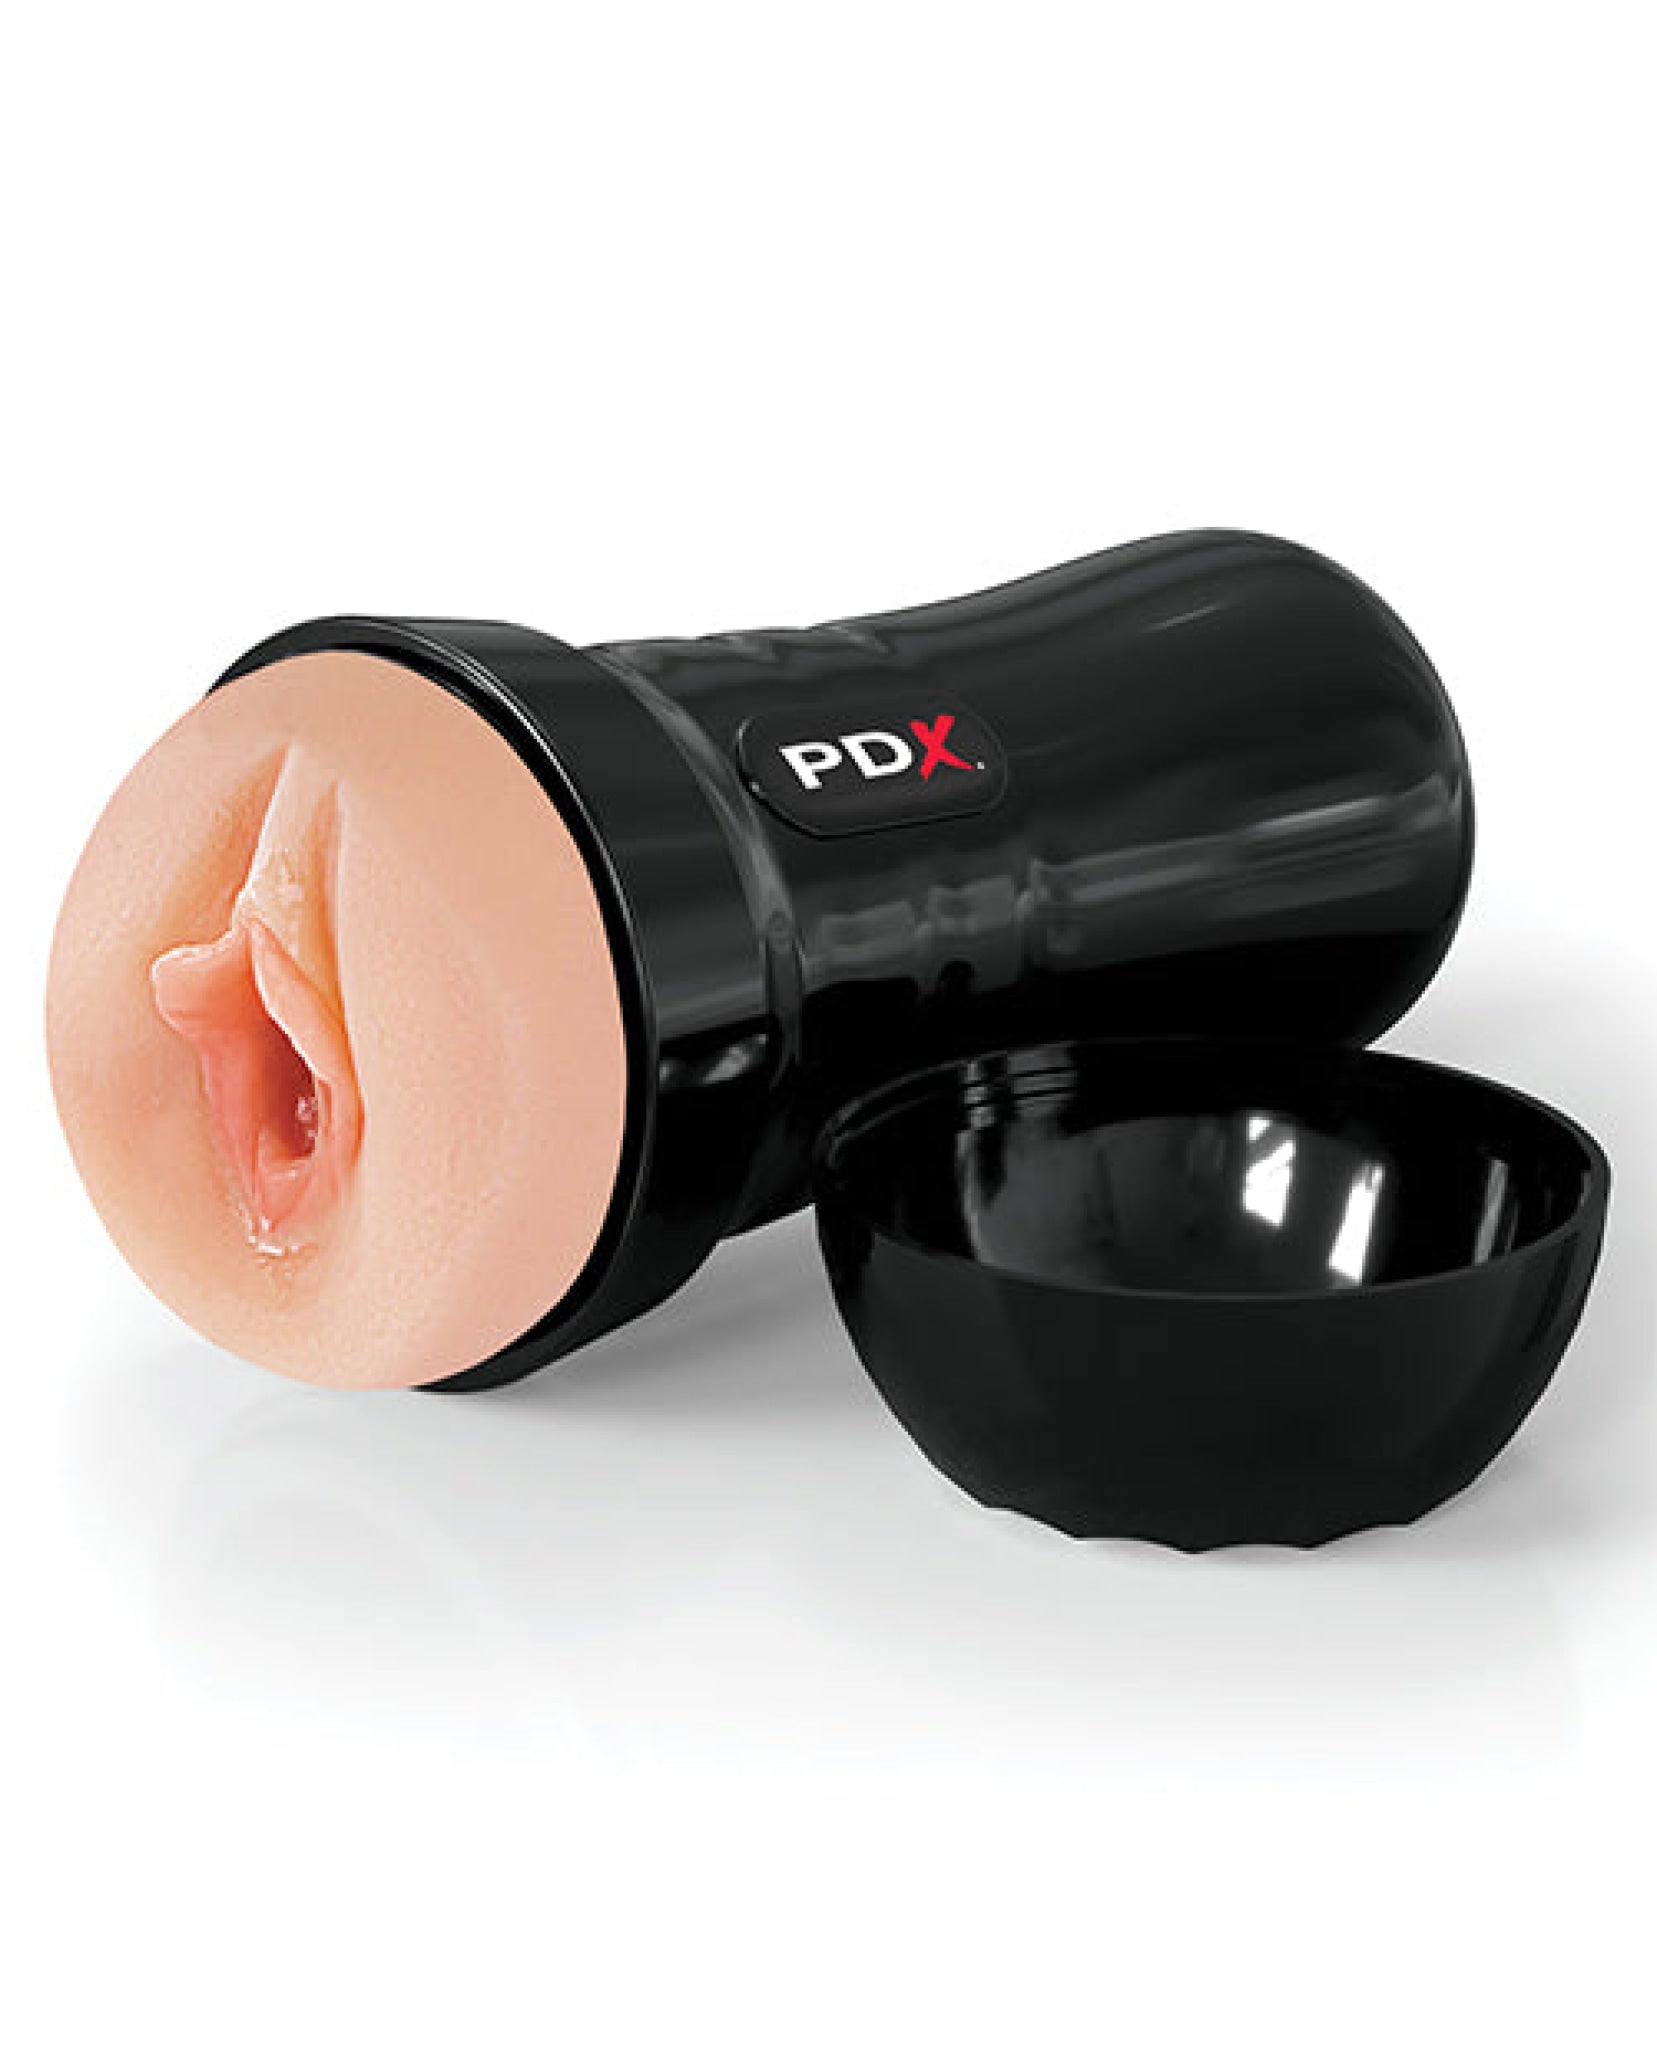 PDX Extreme Wet Pussies Super Juicy Snatch Stroker Pdx Brands